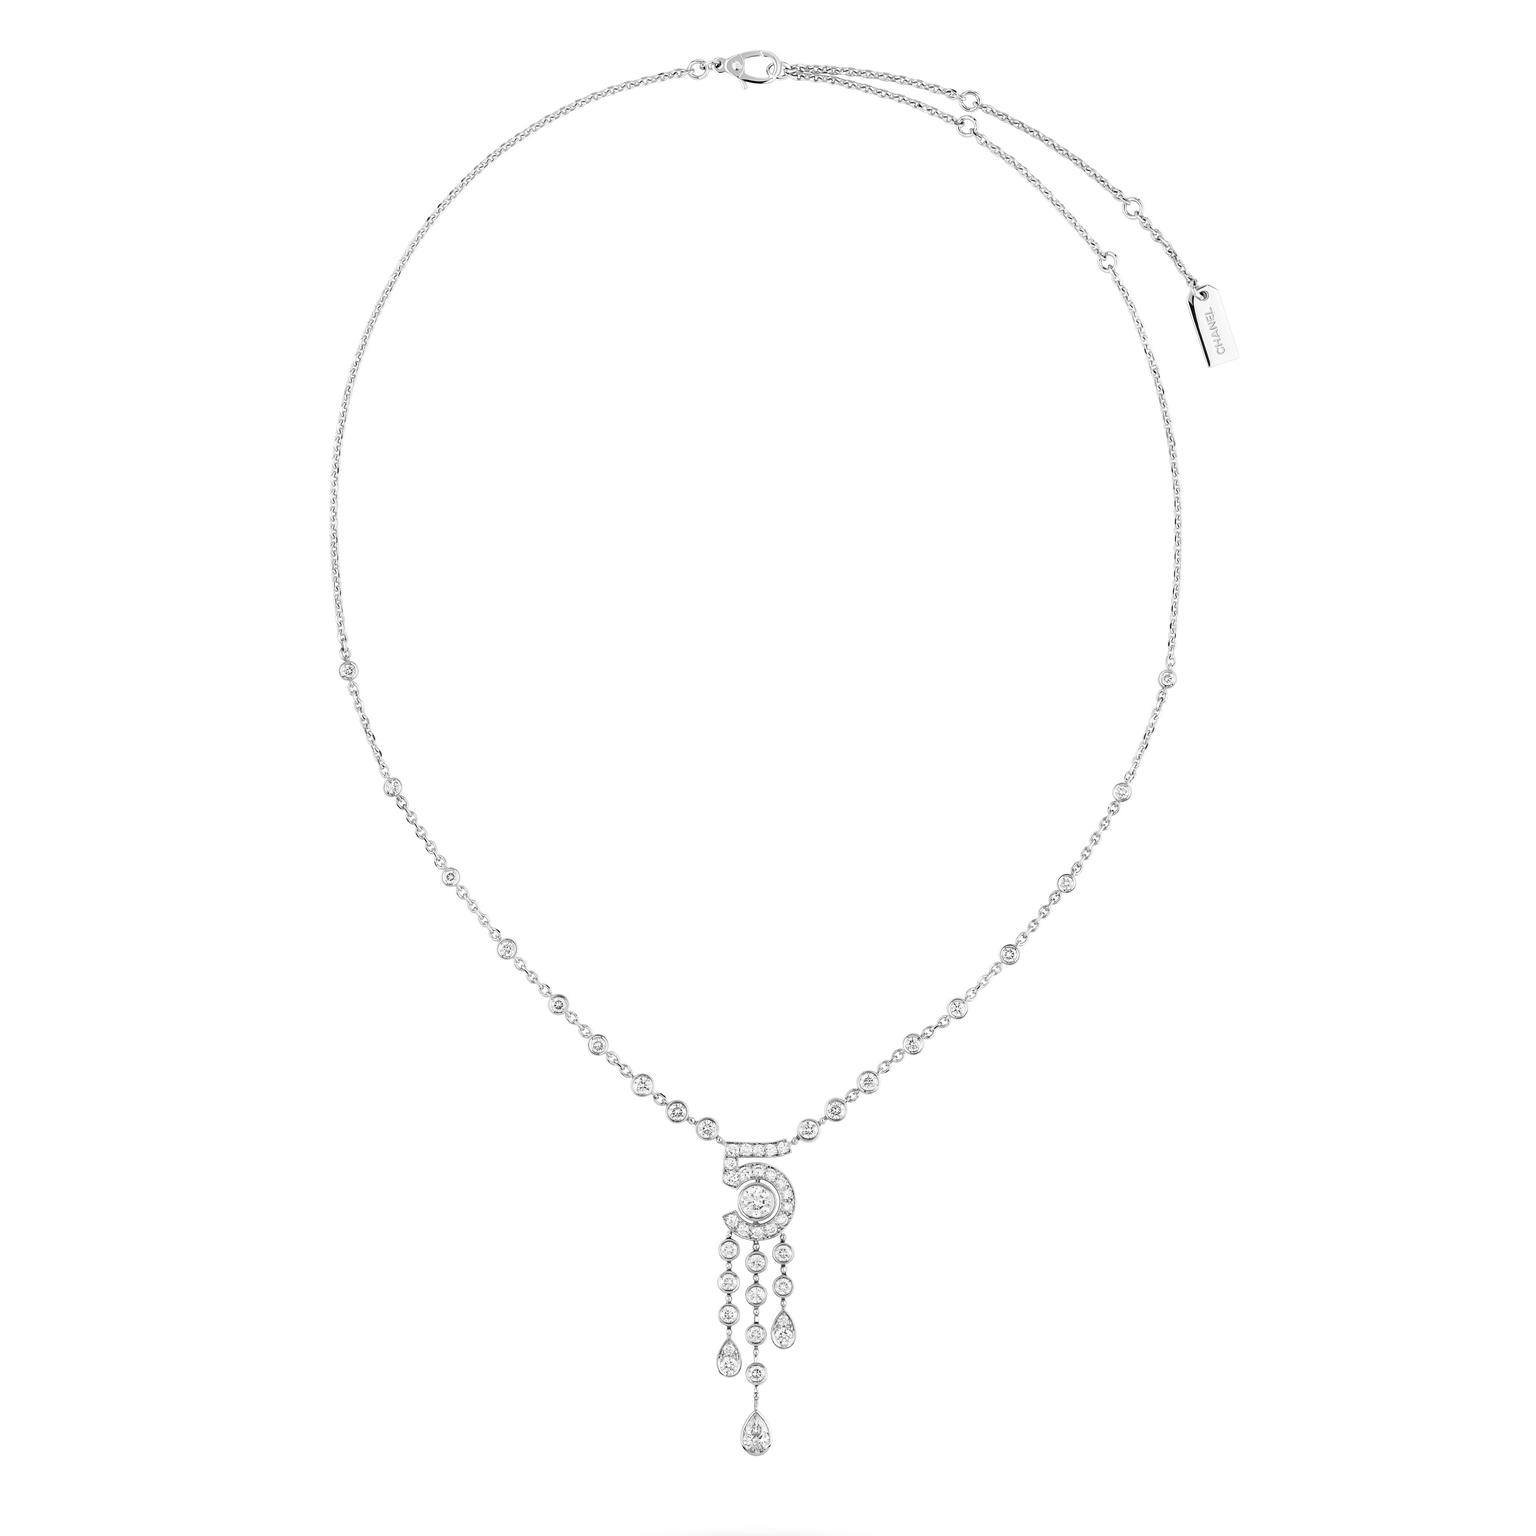 Eternal No5 necklace by Chanel